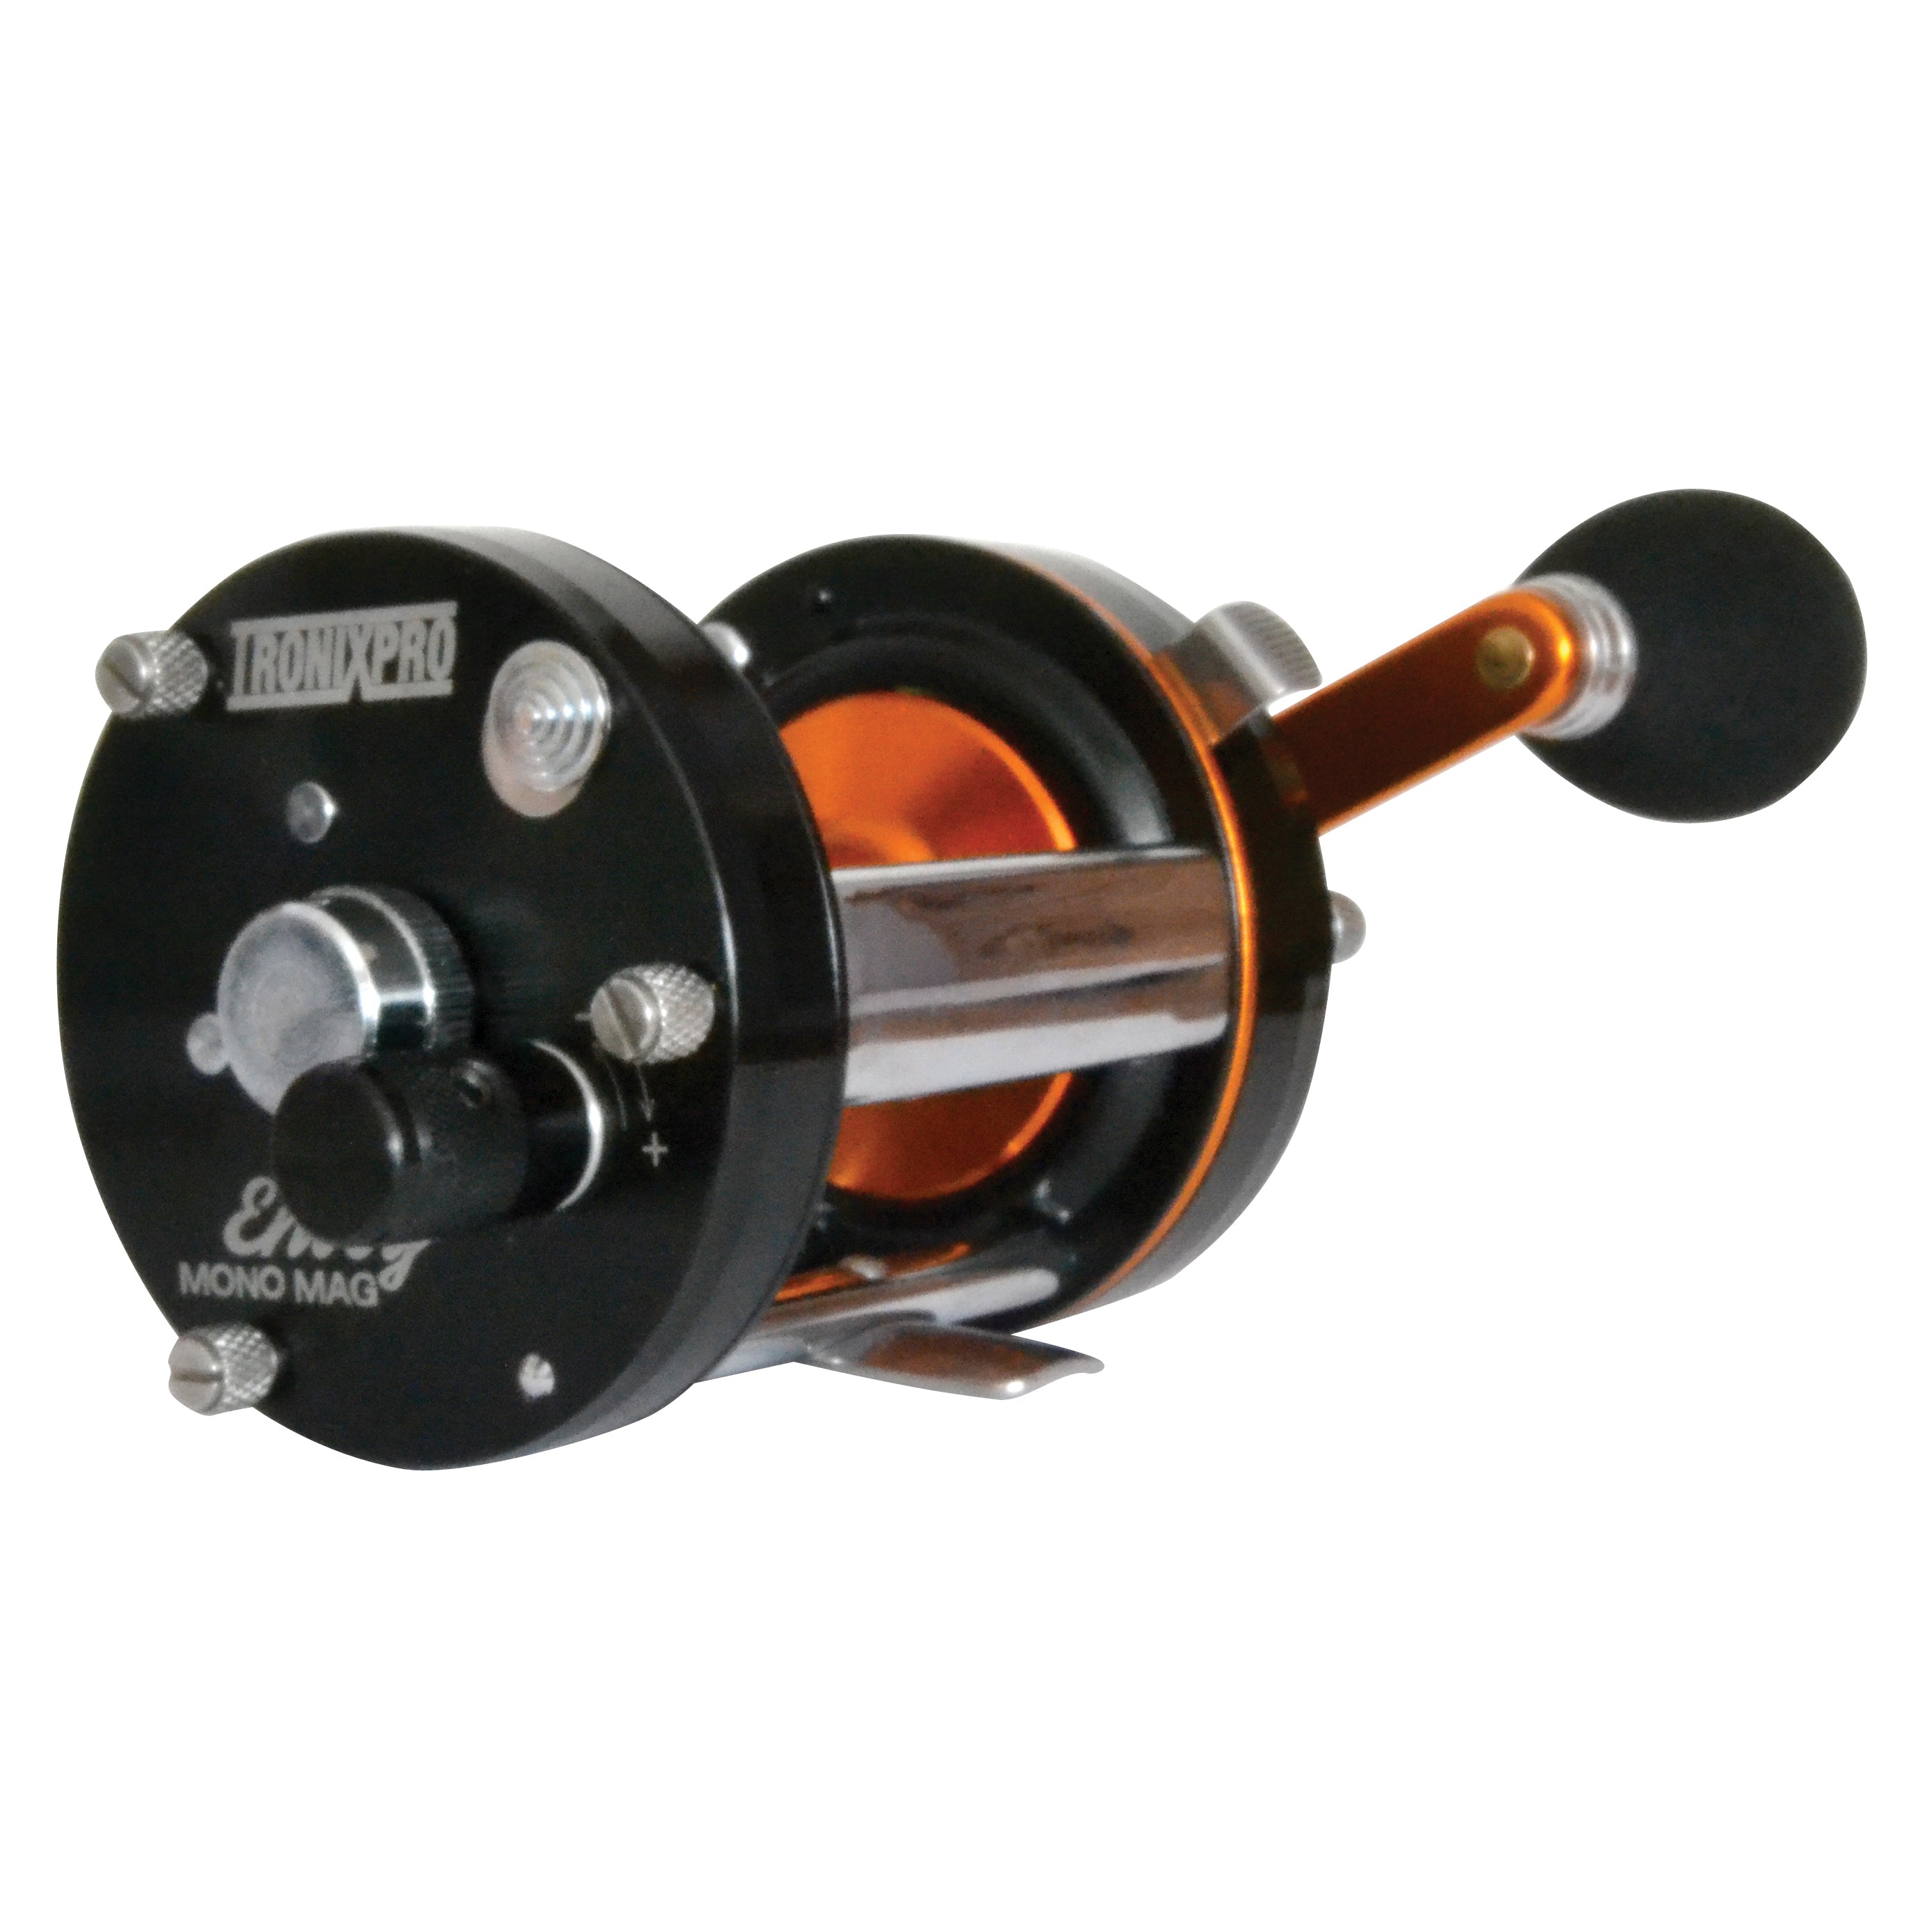 Tronixpro Envoy Mono Mag Multiplier Reel Now Only £39.99